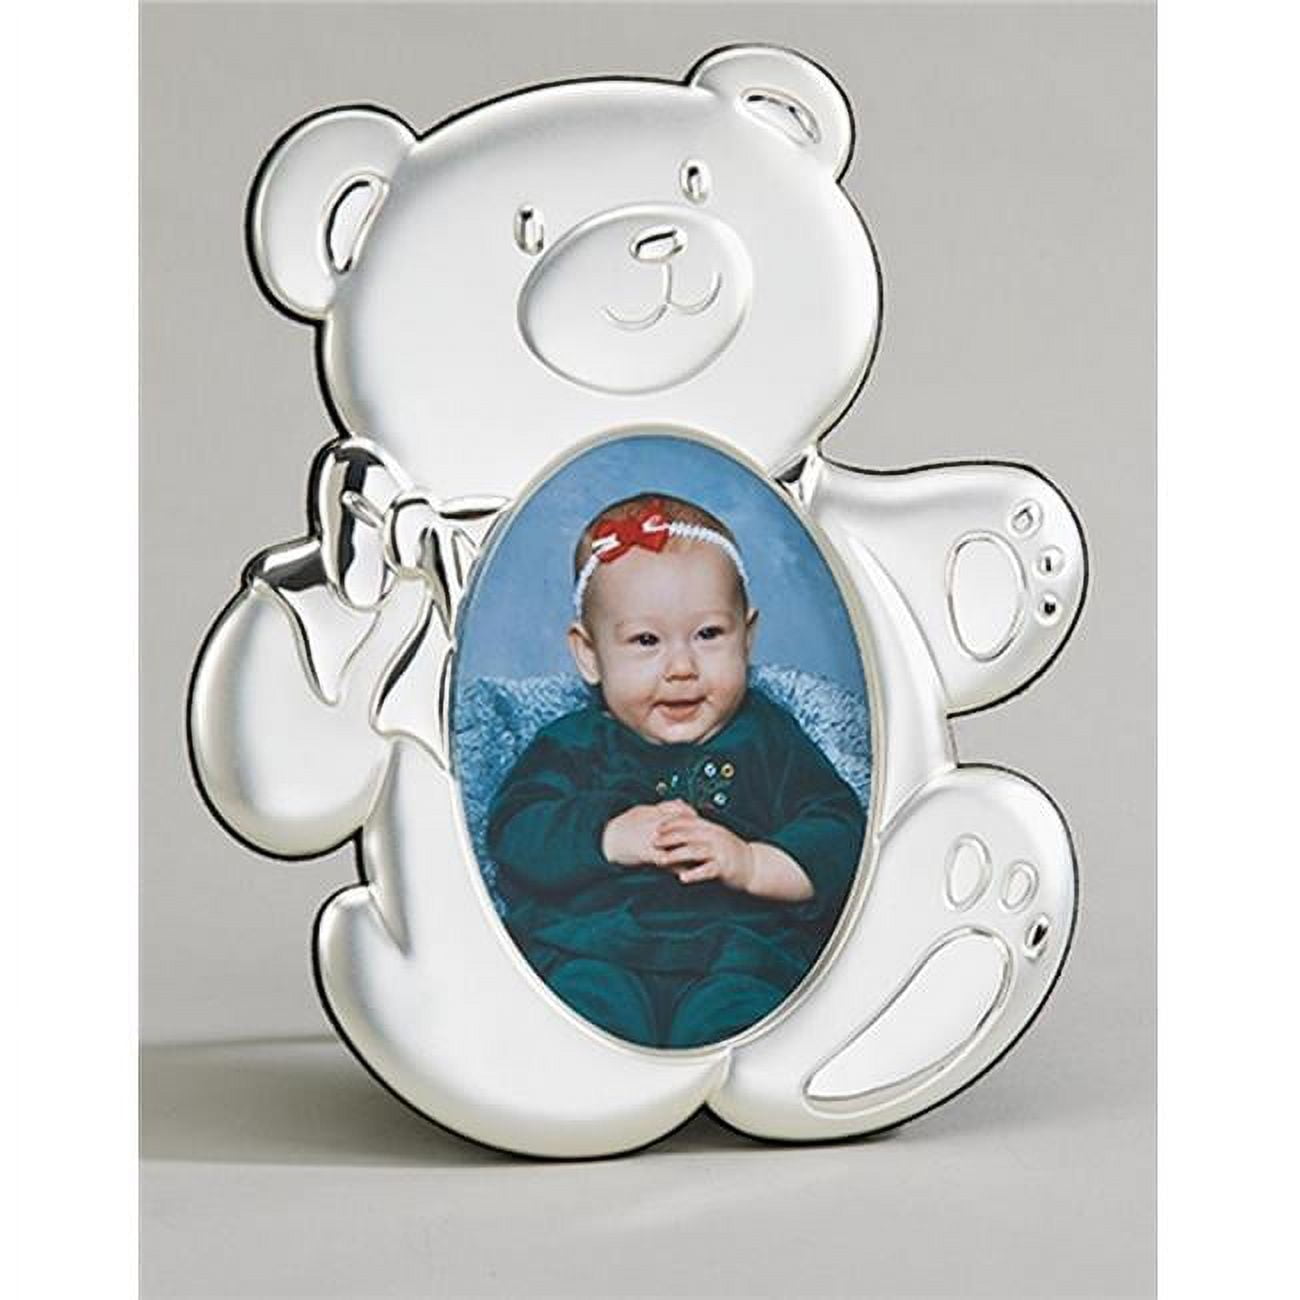 024456 0.5 X 5 In Teddy Bear Frame Holds With 3 Photo